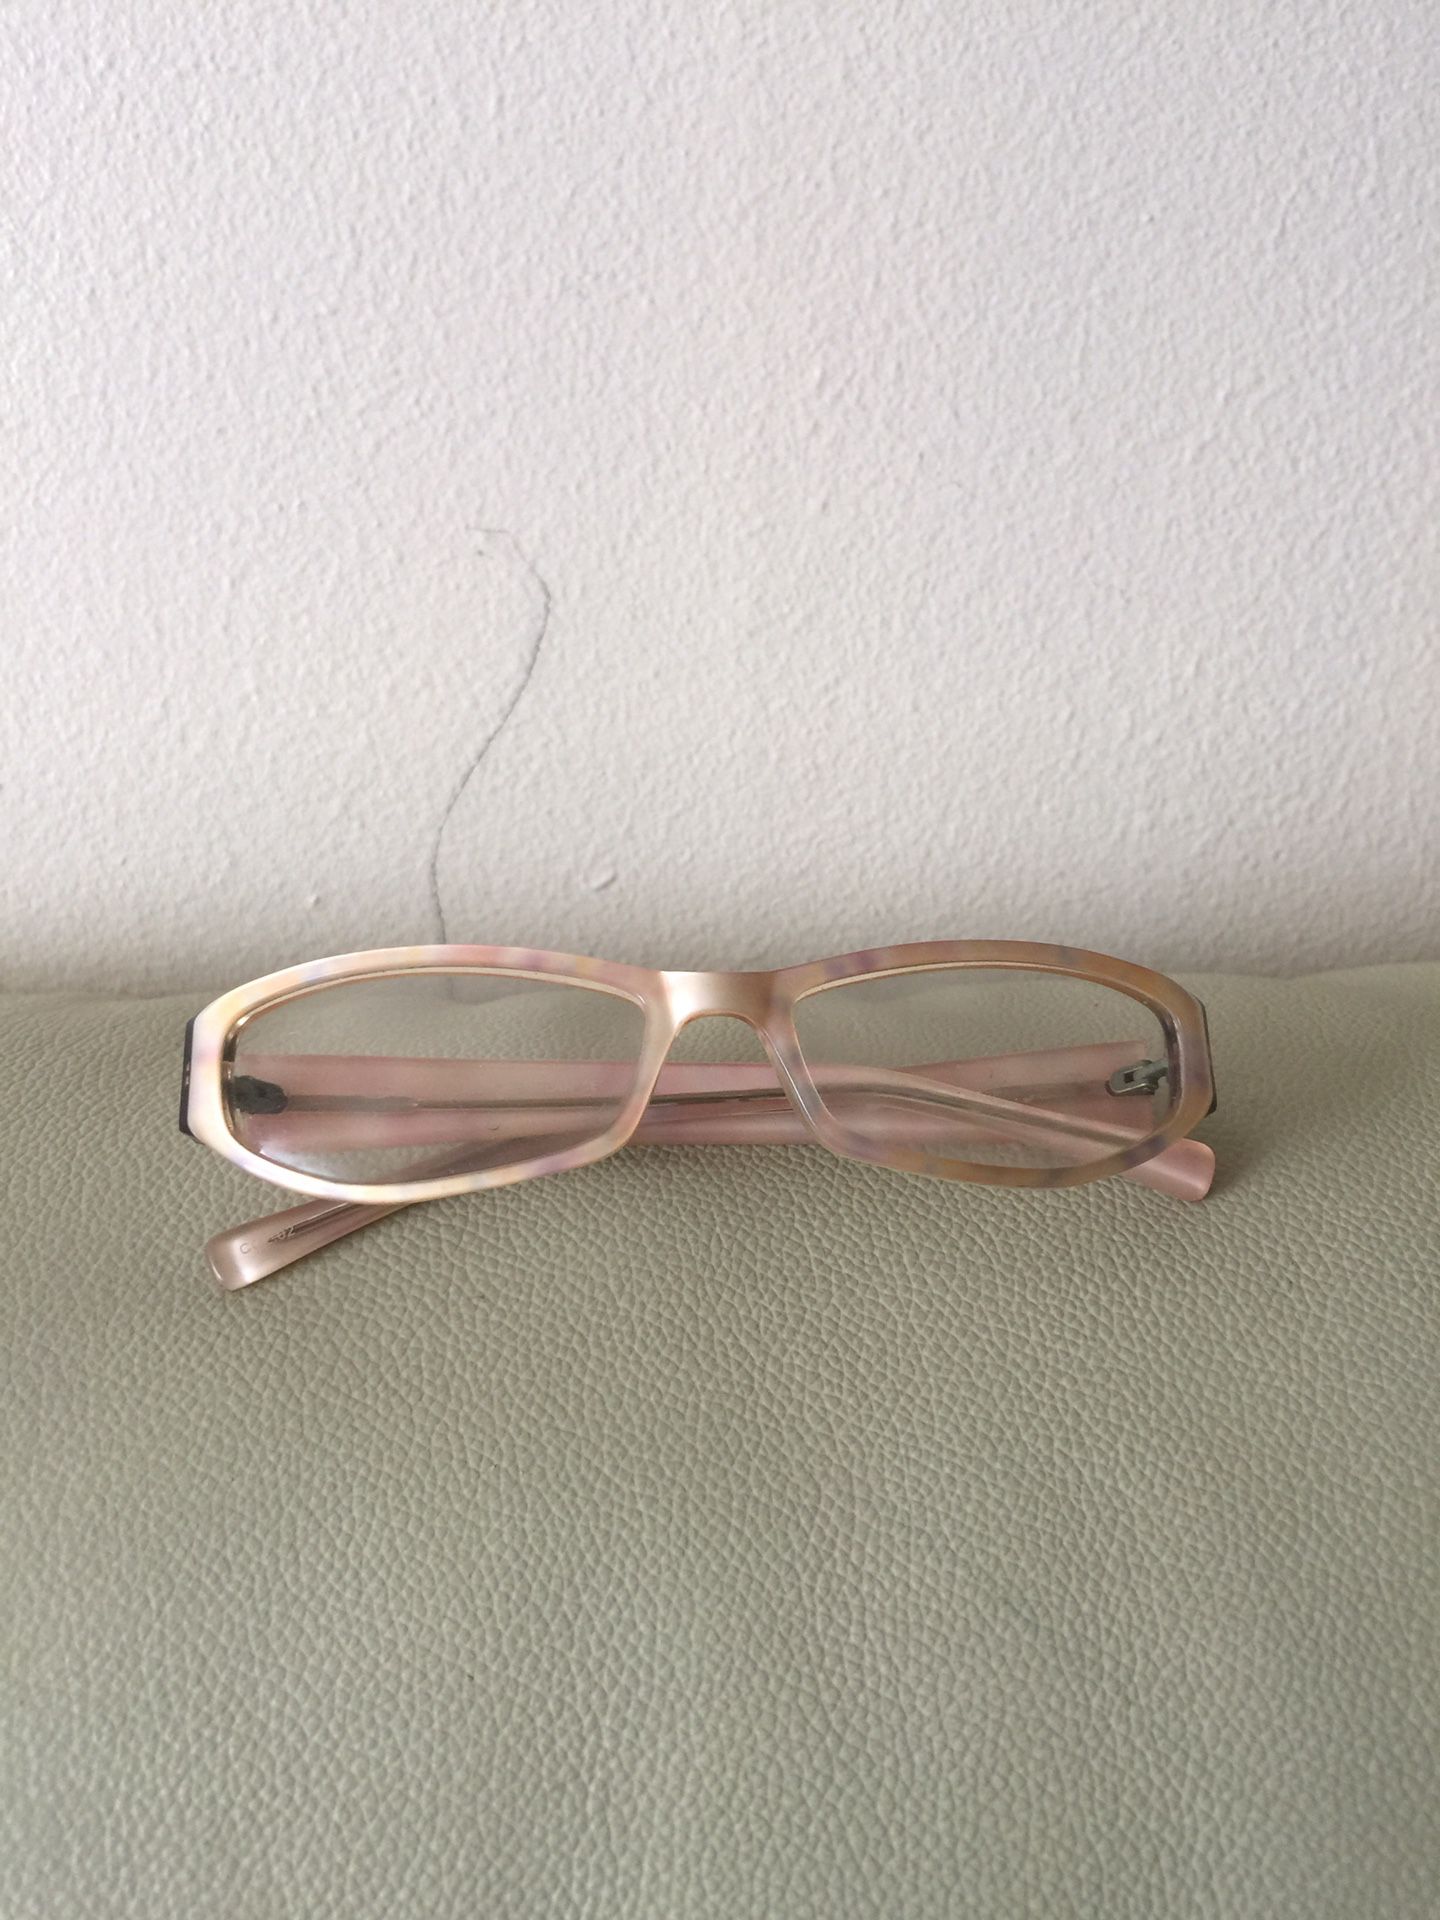 Spectacle frame